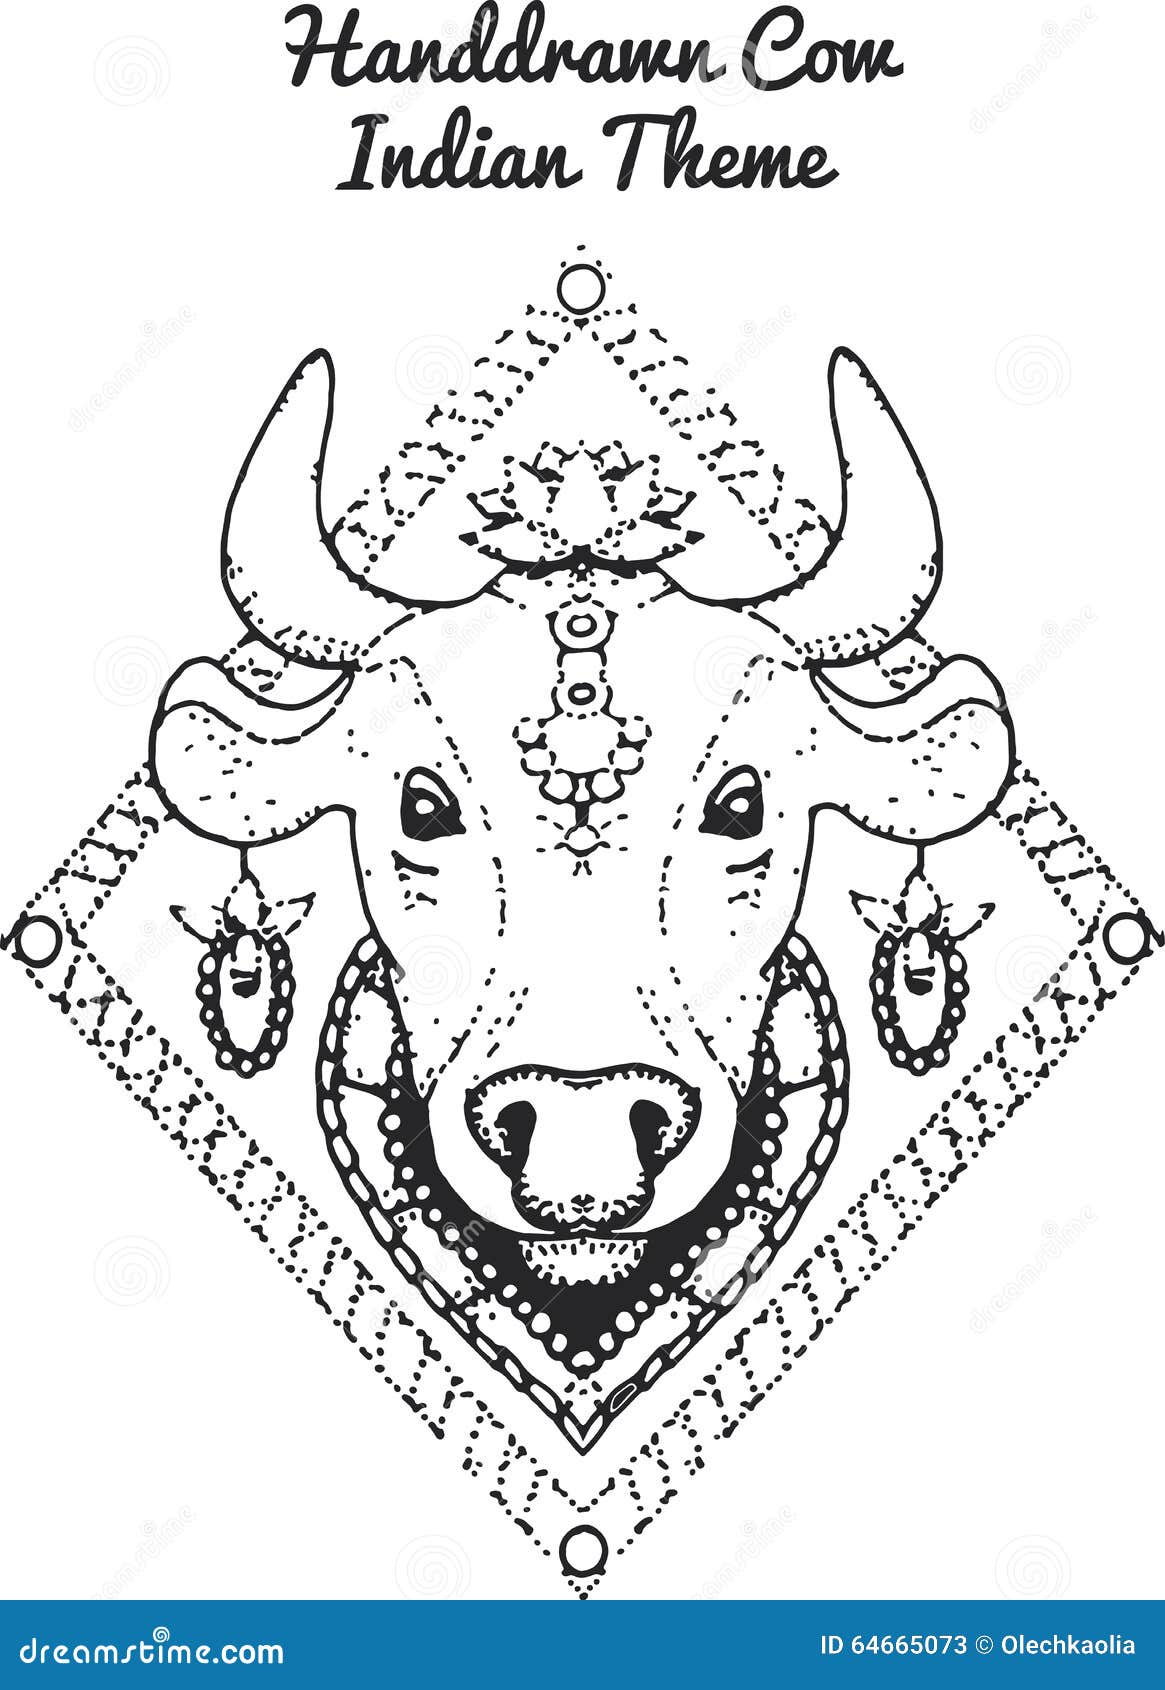 Why we need our Indigenous Cows The Indian Cows  Klimom